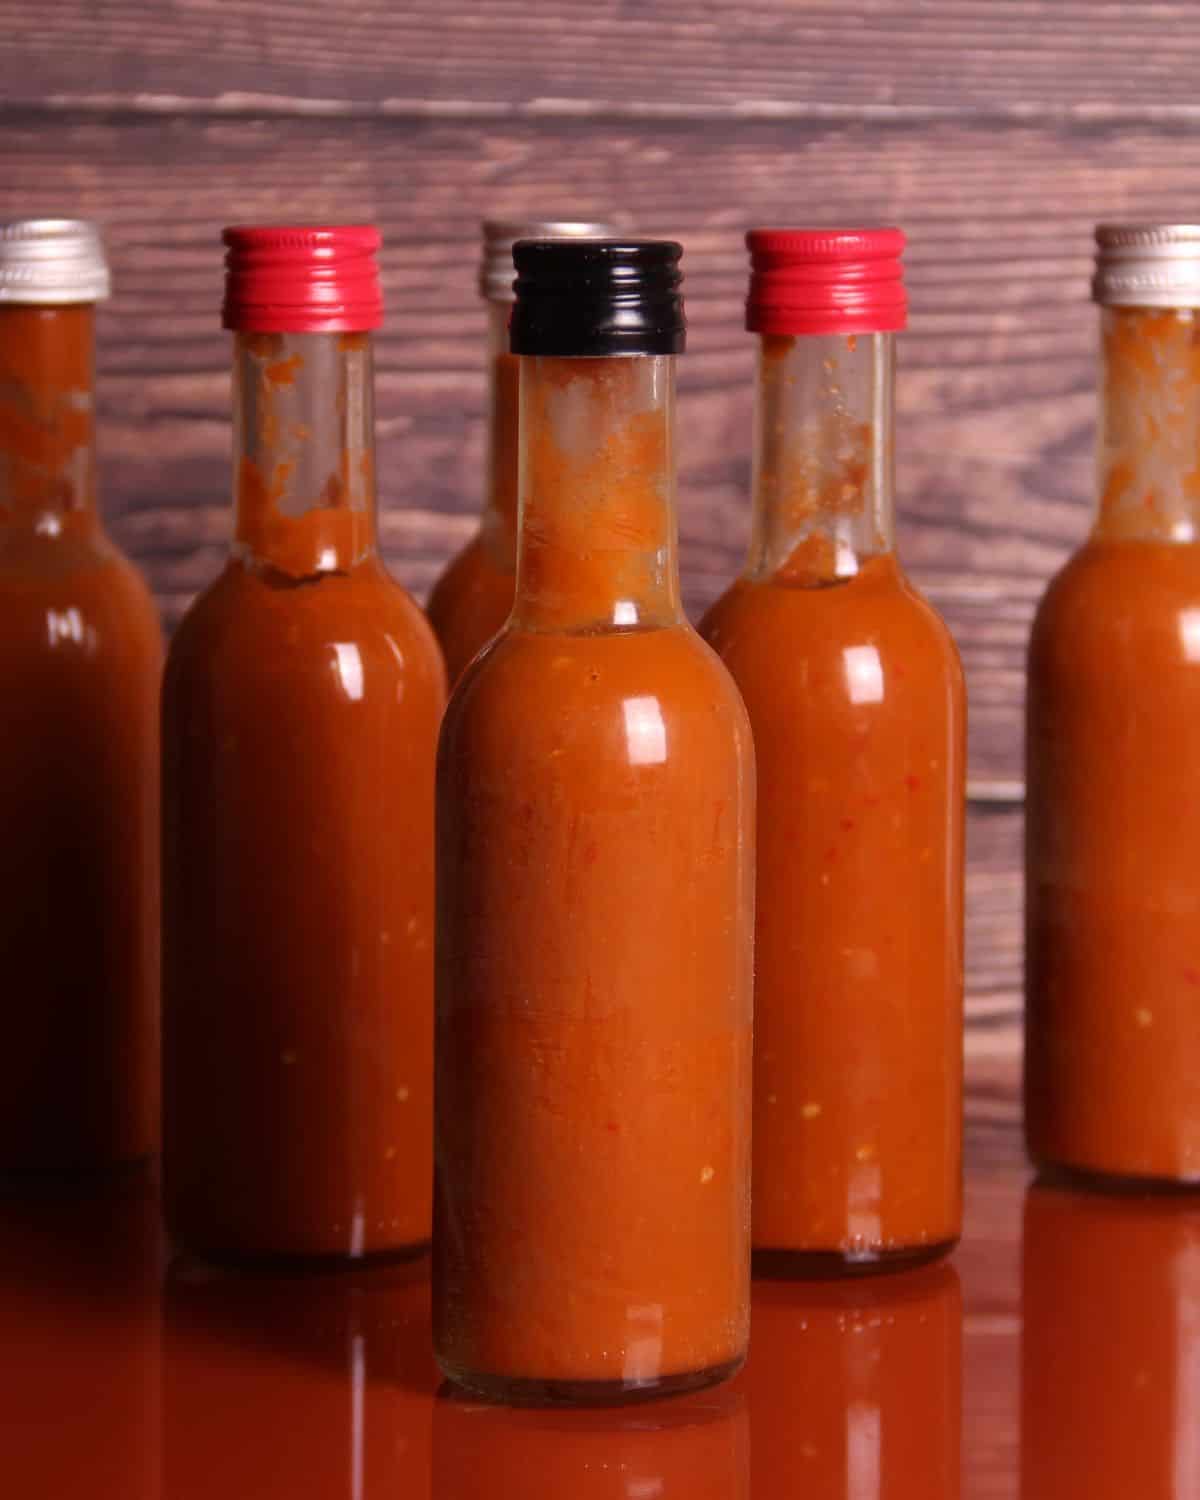 Bottles of hot sauce on a table.